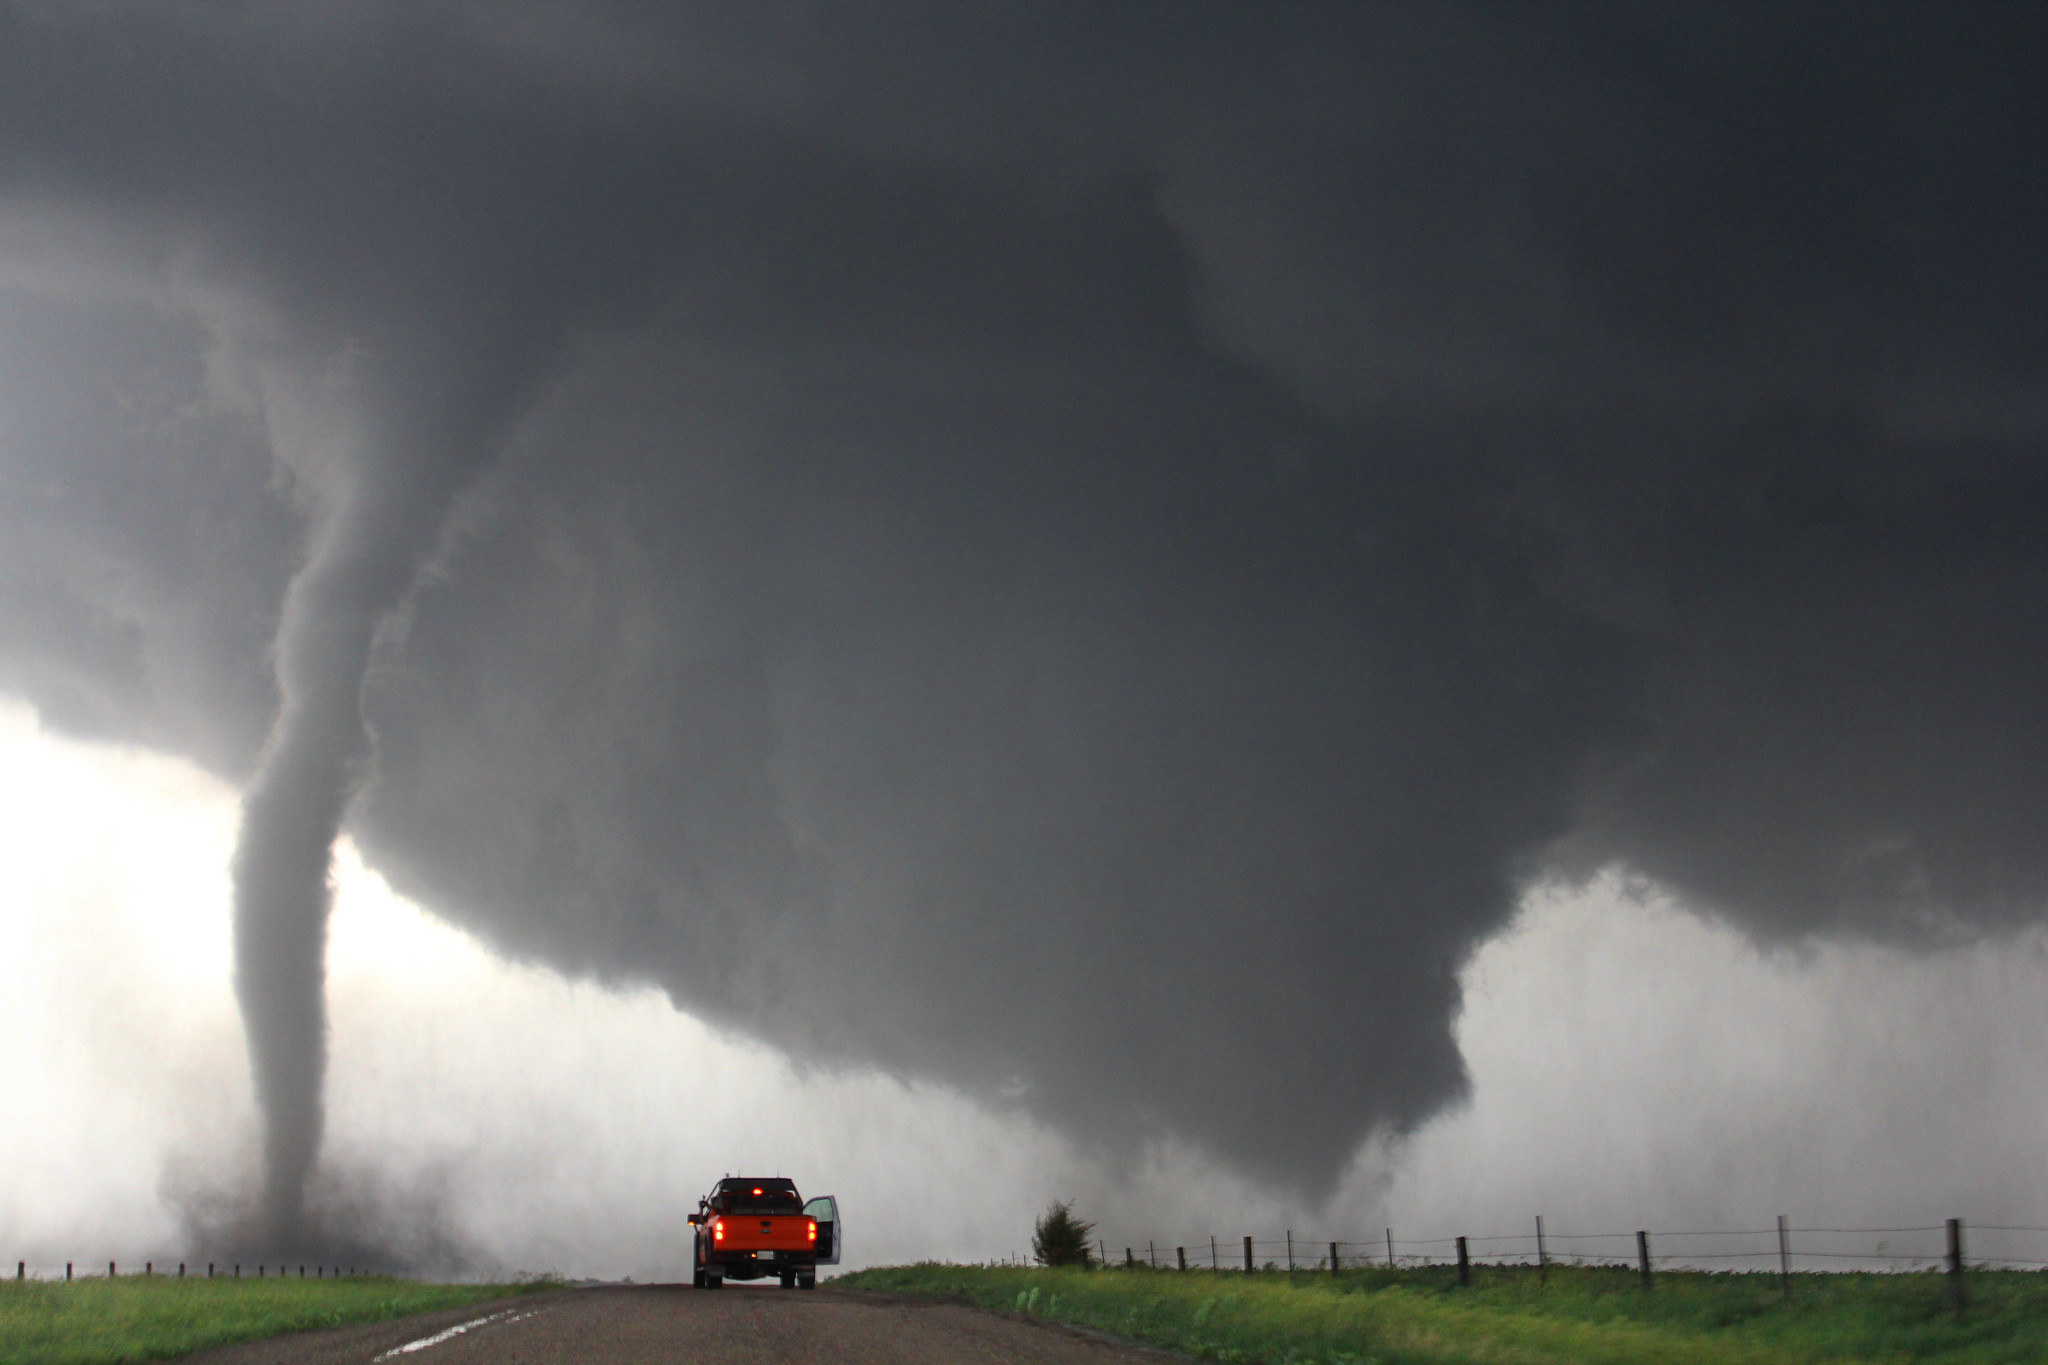 Photograph of a tornado in Nebraska, 2014. The photograph shows a dirt road running toward the horizon. The road is in a field of green grass and is flanked by parallel barbwire fences on either side. A red truck is parked on the road with its taillights illuminated and passenger door open. The sky is gray with dark clouds. To the left, a thin tornado has touched down. To the right, what looks like a much wider tornado is either developing or dissipating. 